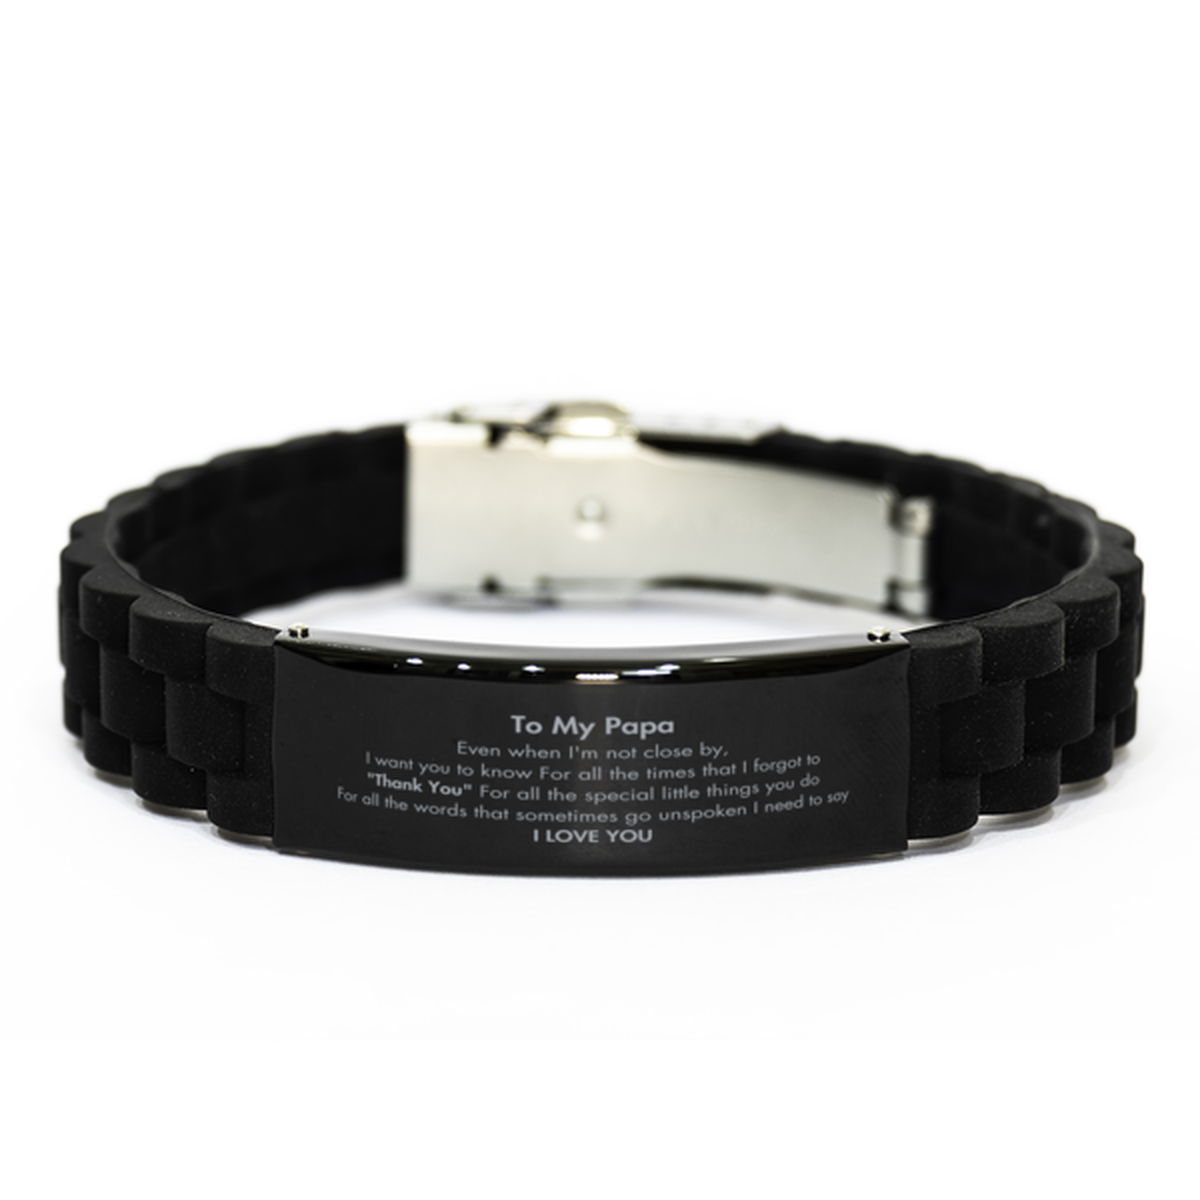 Thank You Gifts for Papa, Keepsake Black Glidelock Clasp Bracelet Gifts for Papa Birthday Mother's day Father's Day Papa For all the words That sometimes go unspoken I need to say I LOVE YOU